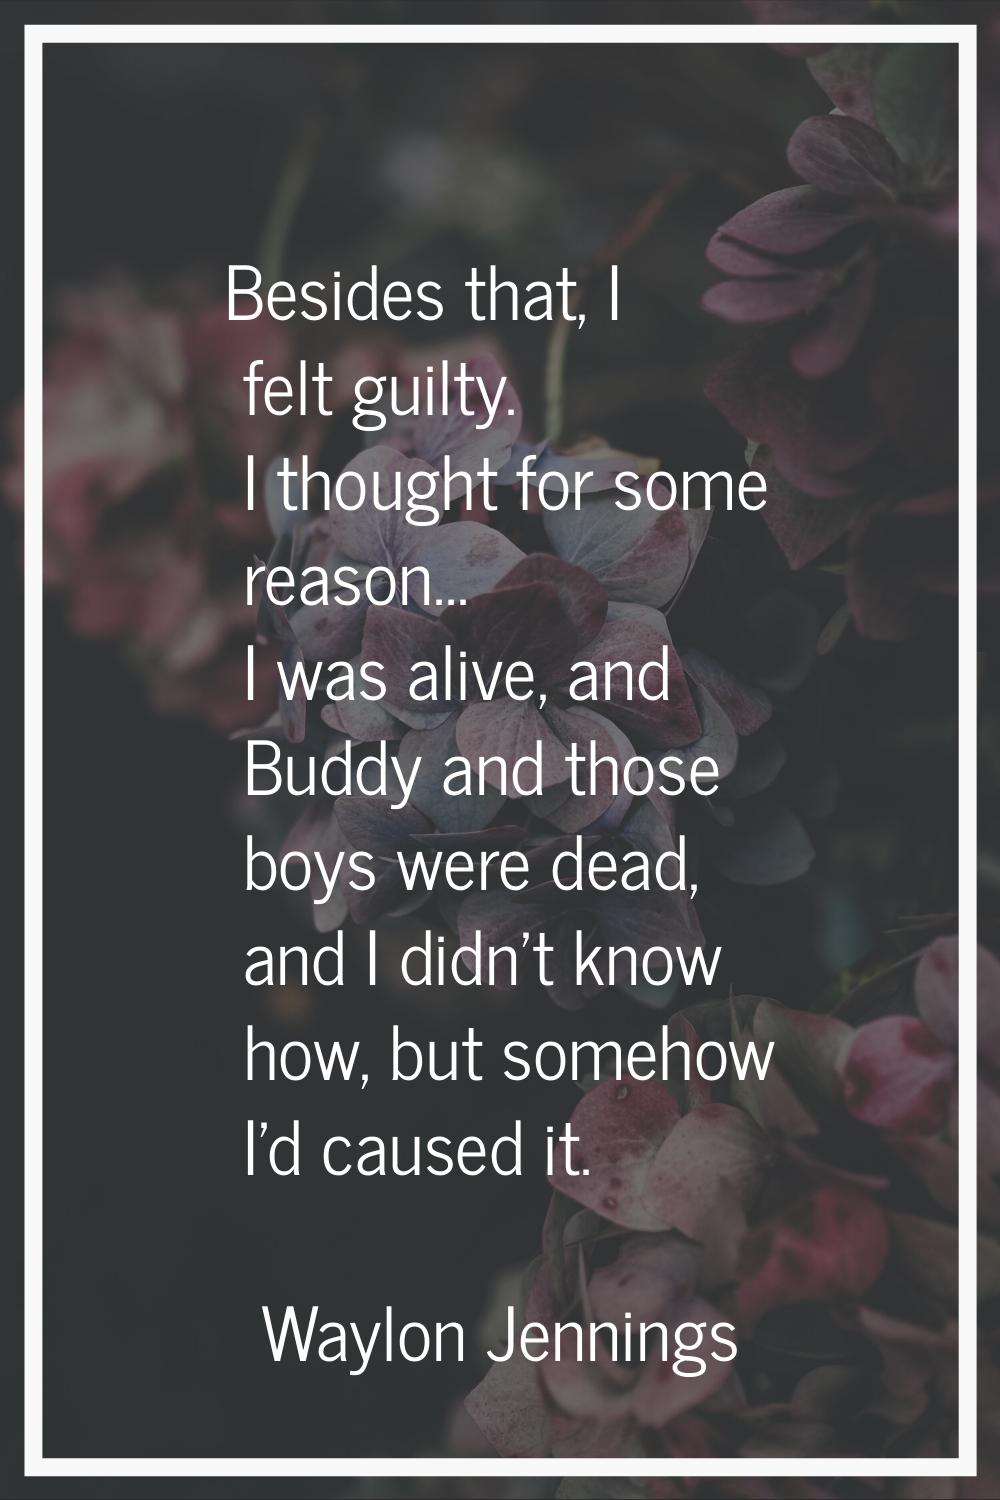 Besides that, I felt guilty. I thought for some reason... I was alive, and Buddy and those boys wer